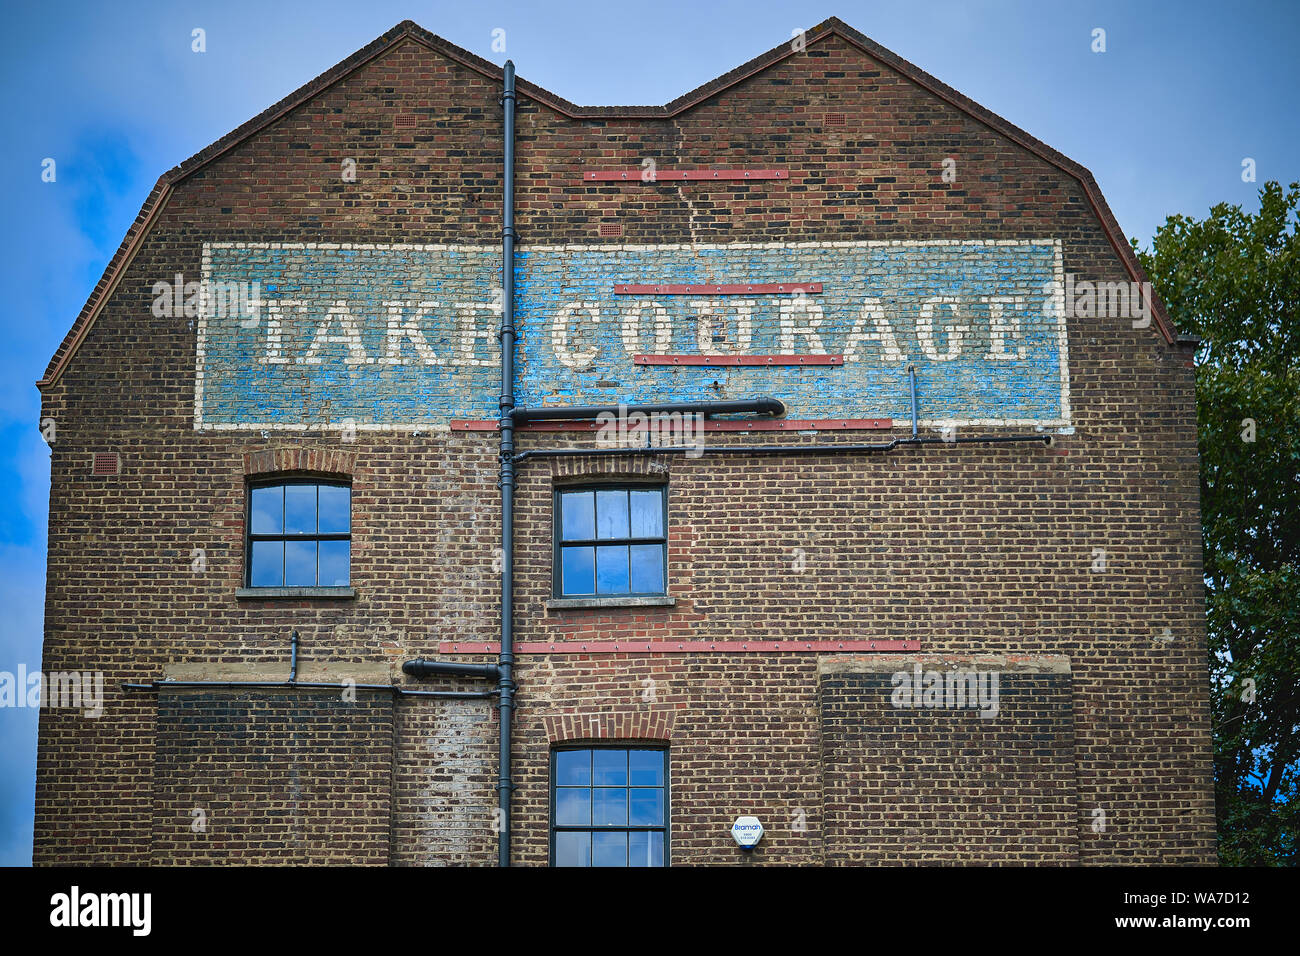 A blue and white 'ghost' sign saying 'take courage' on a brickwork facade of an old brewery in central London. Landscape format. Stock Photo